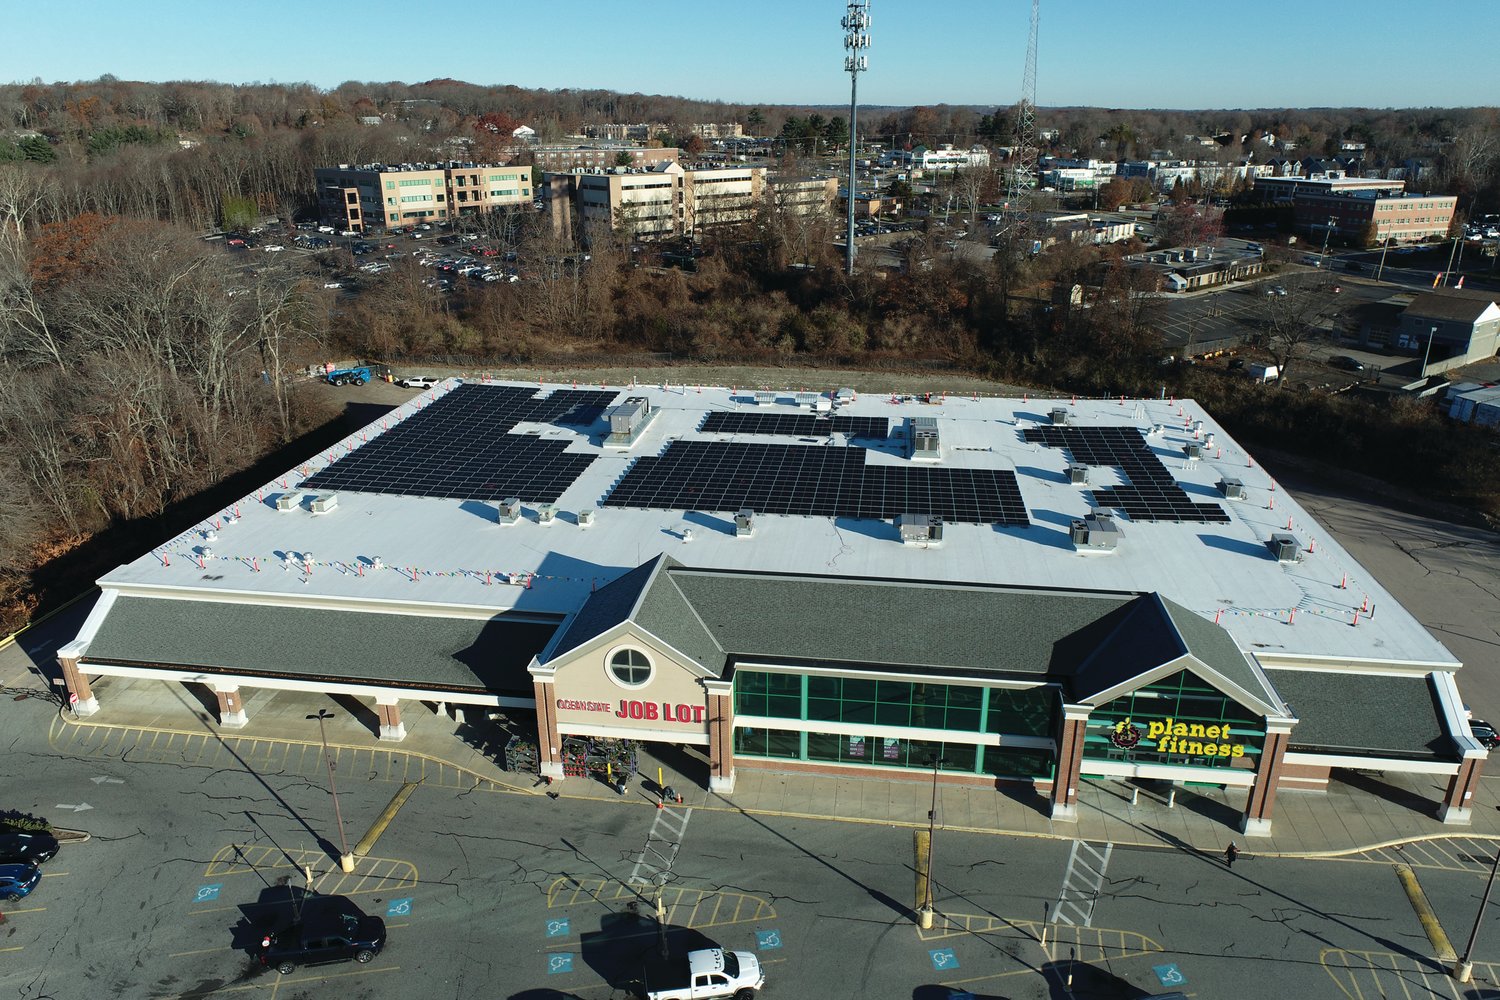 SKY VIEW: A Rhode Island based solar energy company has installed 750 solar panels on the roof of Ocean State Job Lot’s store at 1493 Hartford Ave., in Johnston.